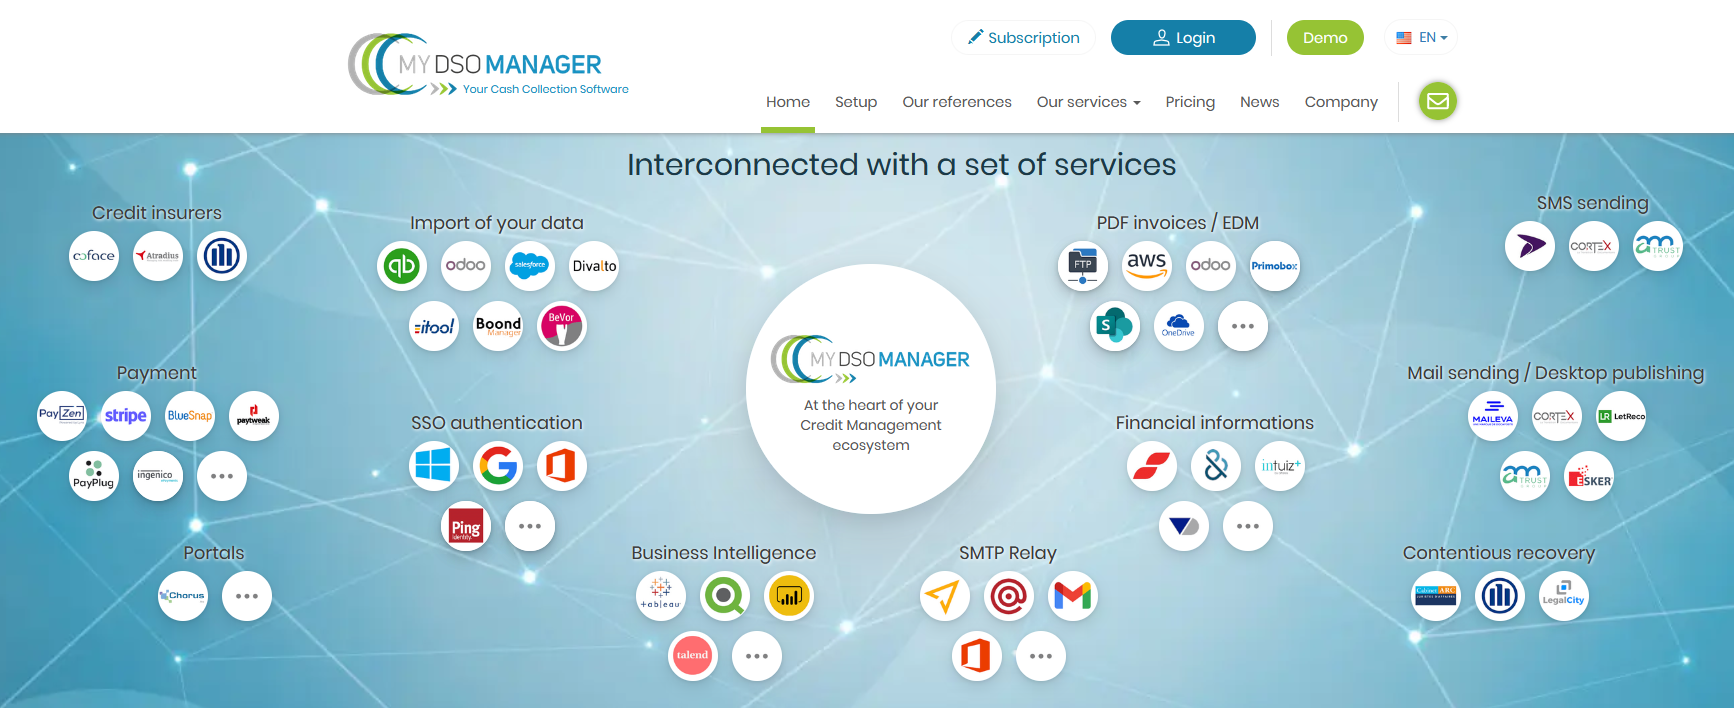 MY DSO MANAGER Software - My DSO Manager at the heart of your Credit Management ecosystem : interconnected with a set of services